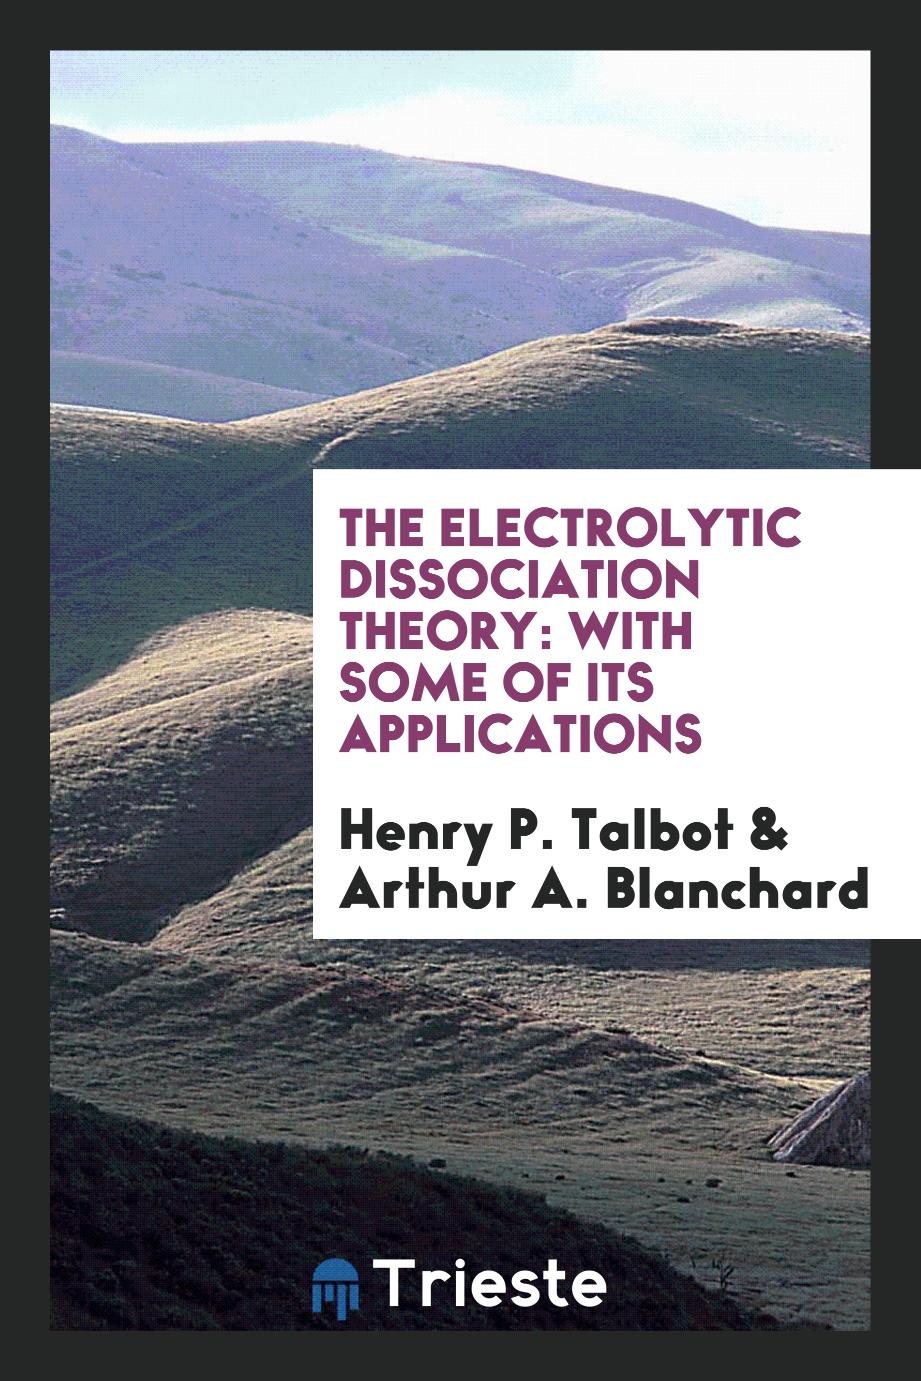 The Electrolytic Dissociation Theory: With Some of Its Applications